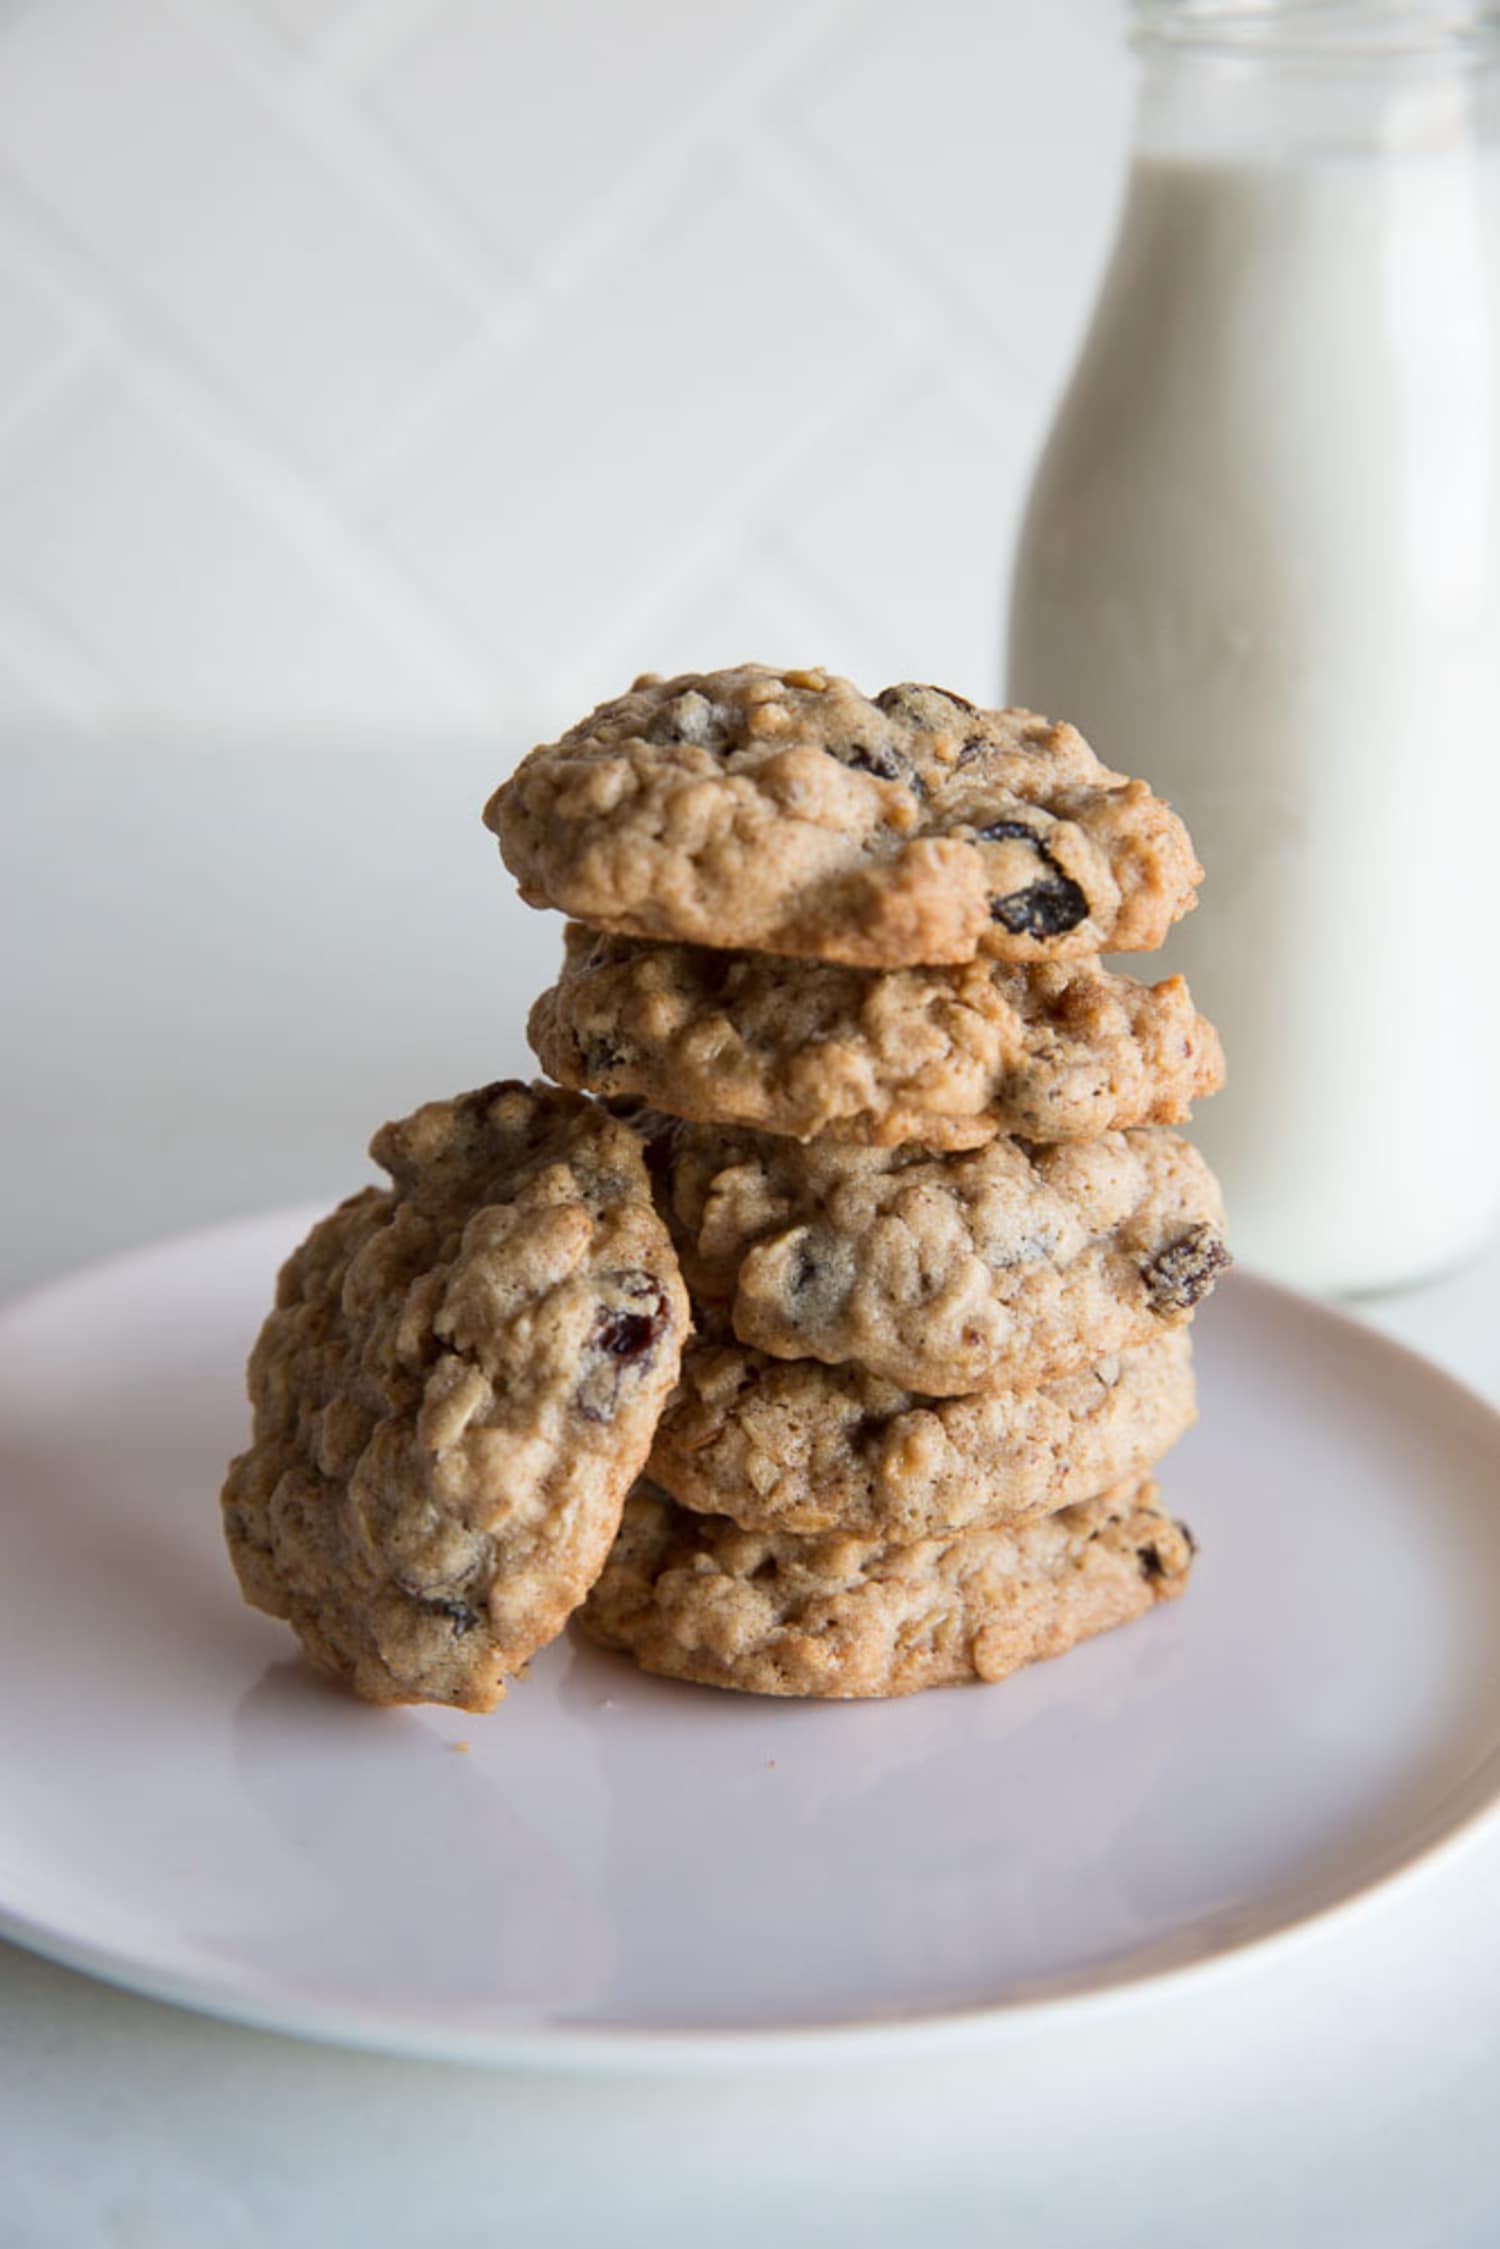 How To Make Soft & Chewy Oatmeal Cookies | Kitchn